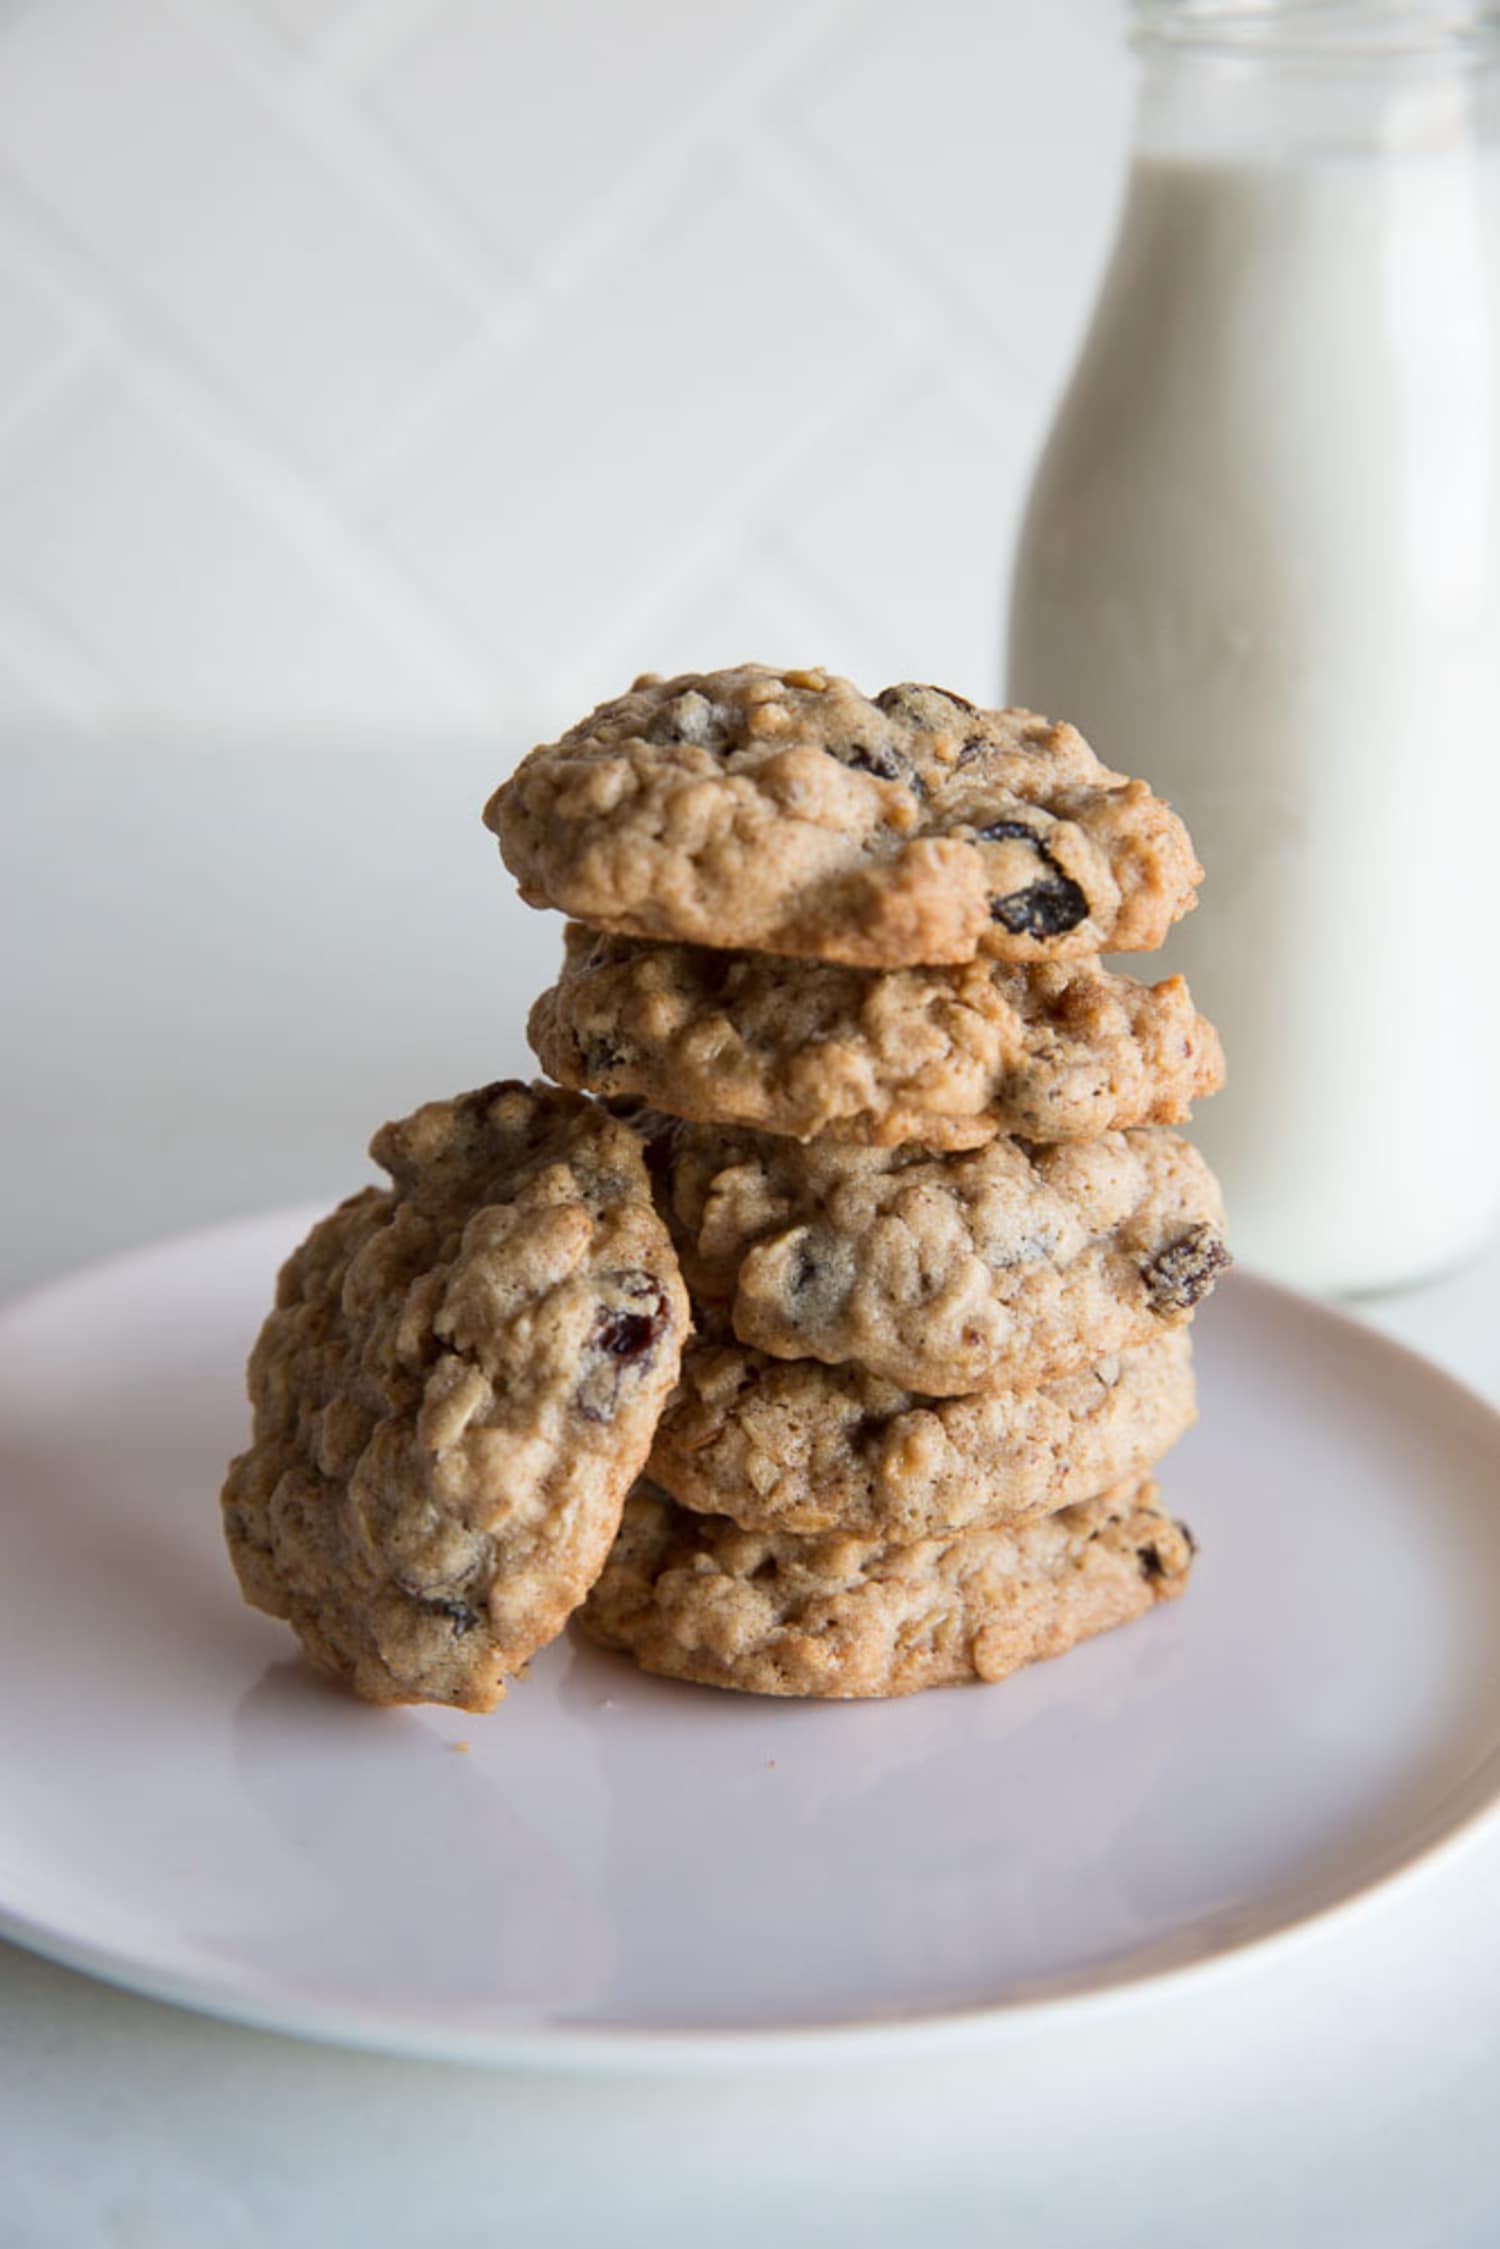 How To Make Soft & Chewy Oatmeal Cookies | Kitchn